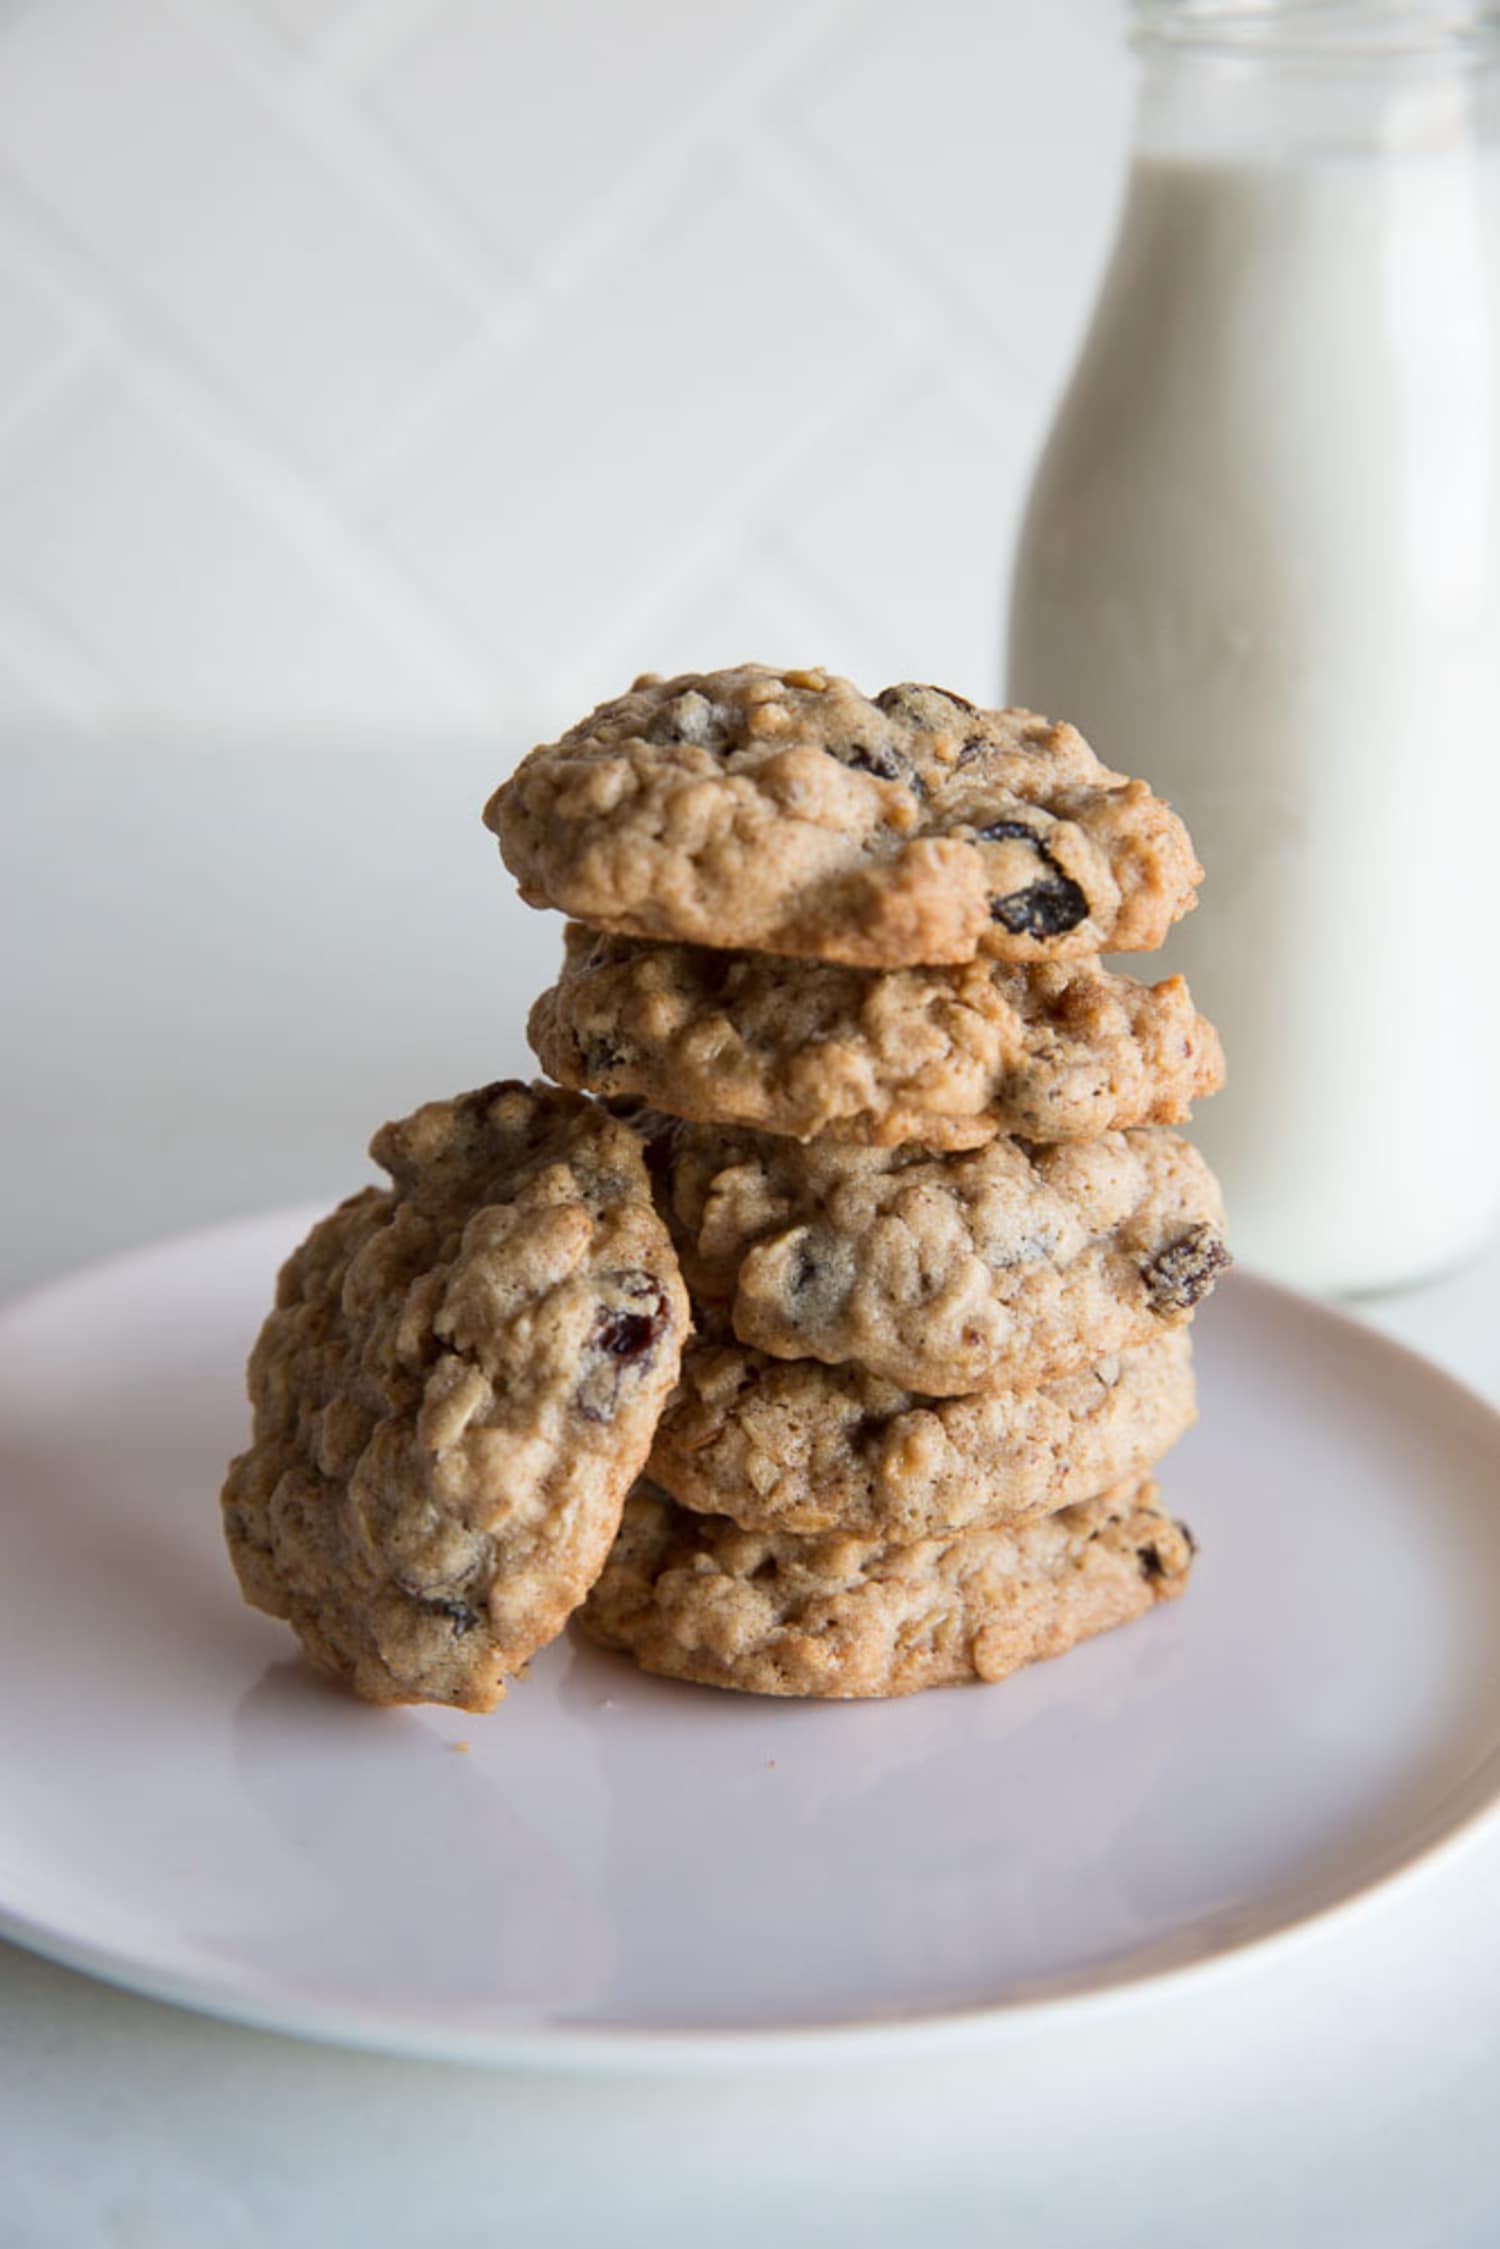 How To Make Soft & Chewy Oatmeal Cookies | Kitchn